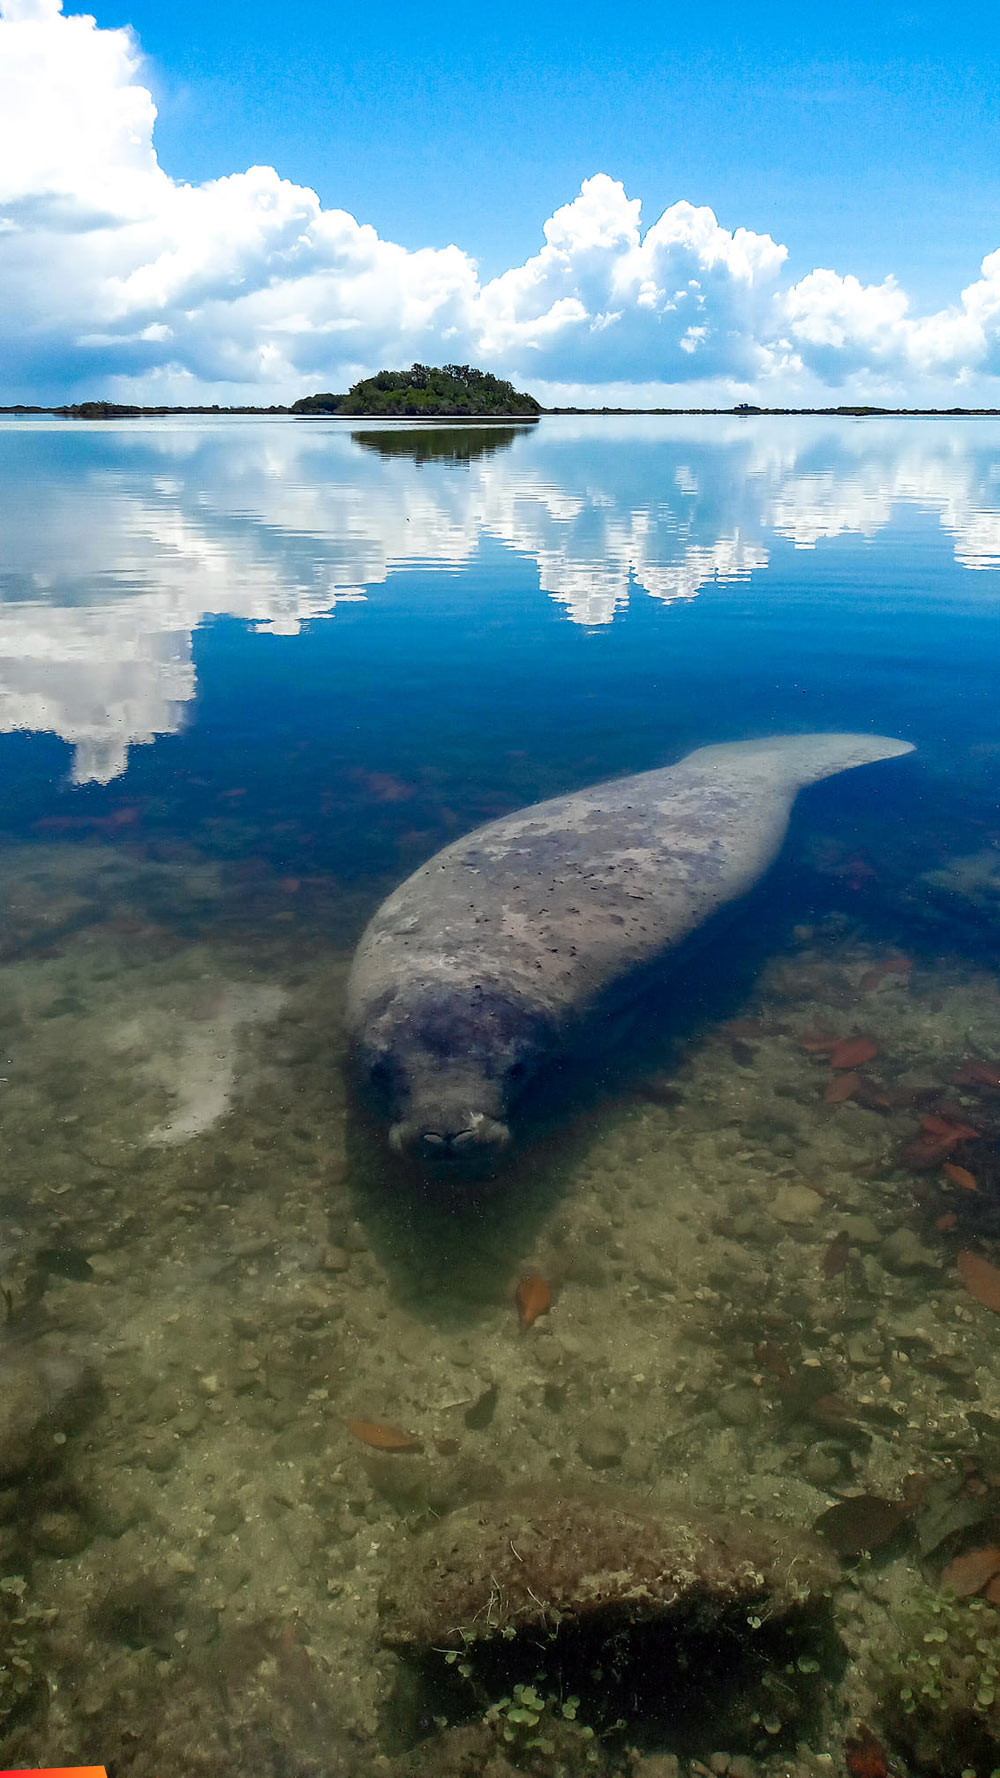 An amazing picture of a manatee around the tiny village of Sarteneja